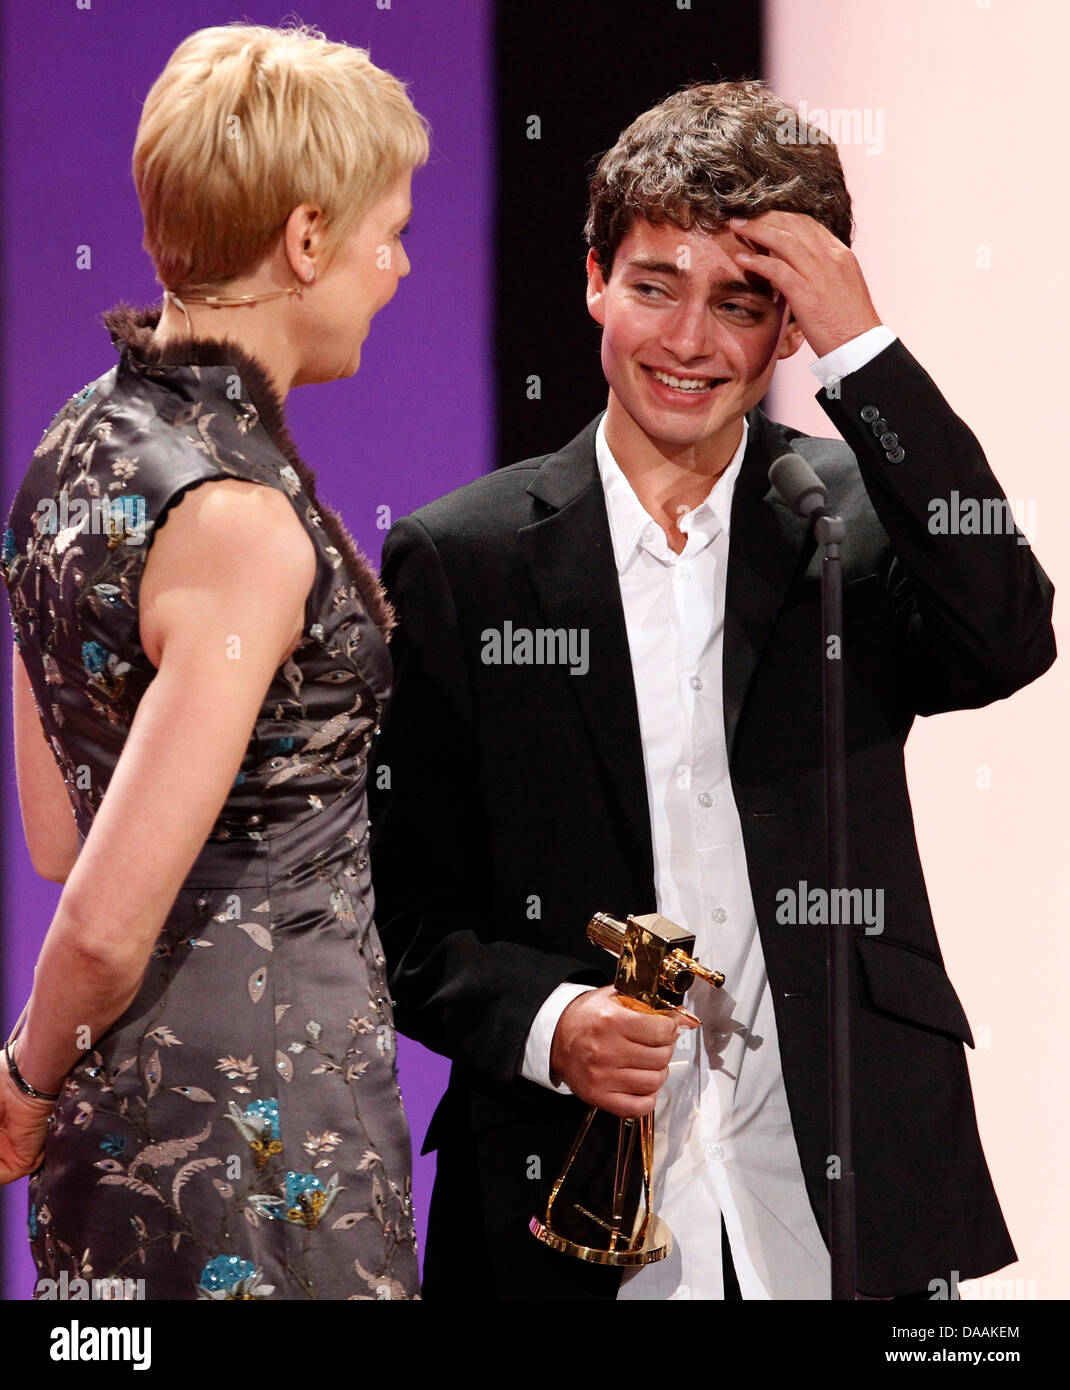 German actor Max Hegewald receives the award for best newcomer from comedian Cordula Stratmann during the 46th Golden Camera award ceremony in Berlin, Germany, 5 February 2011. The award honours the audience's favourites from film, television, sports and media. Photo: Tobias Schwarz dpa/lbn Stock Photo